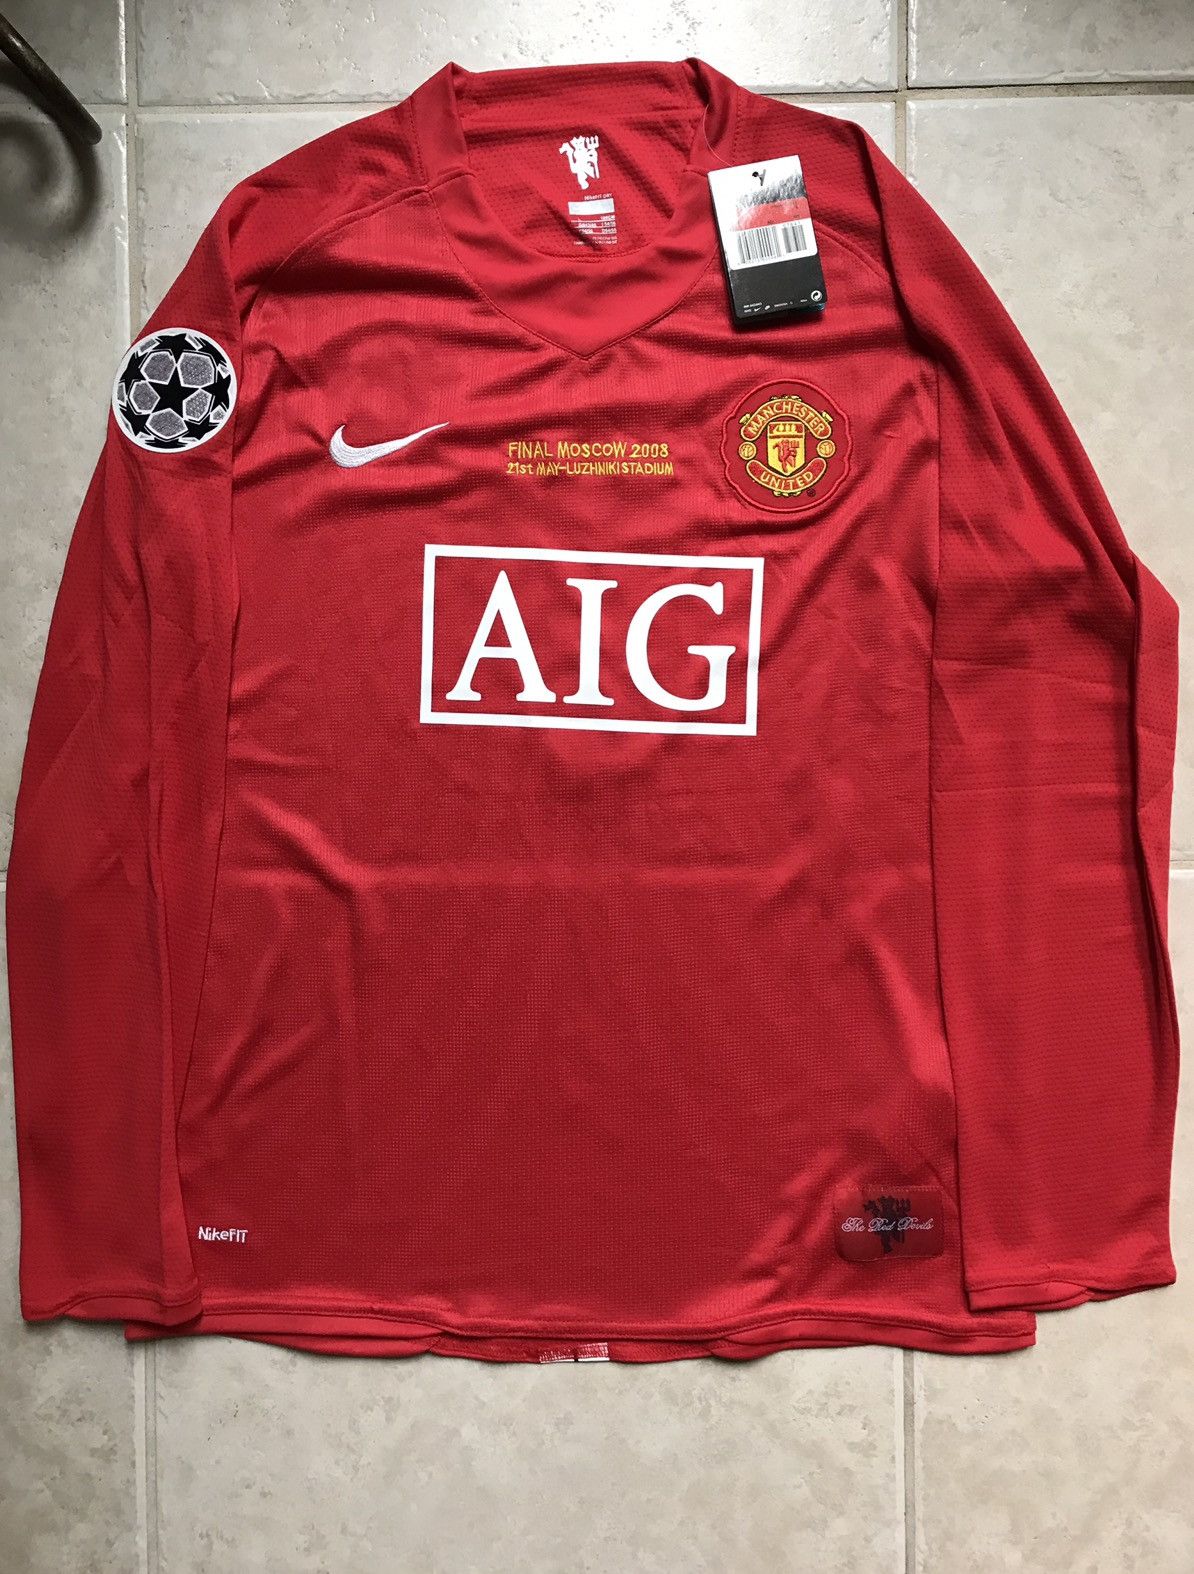 Vintage Cristiano ronaldo manchester united 2008 UCL final jersey